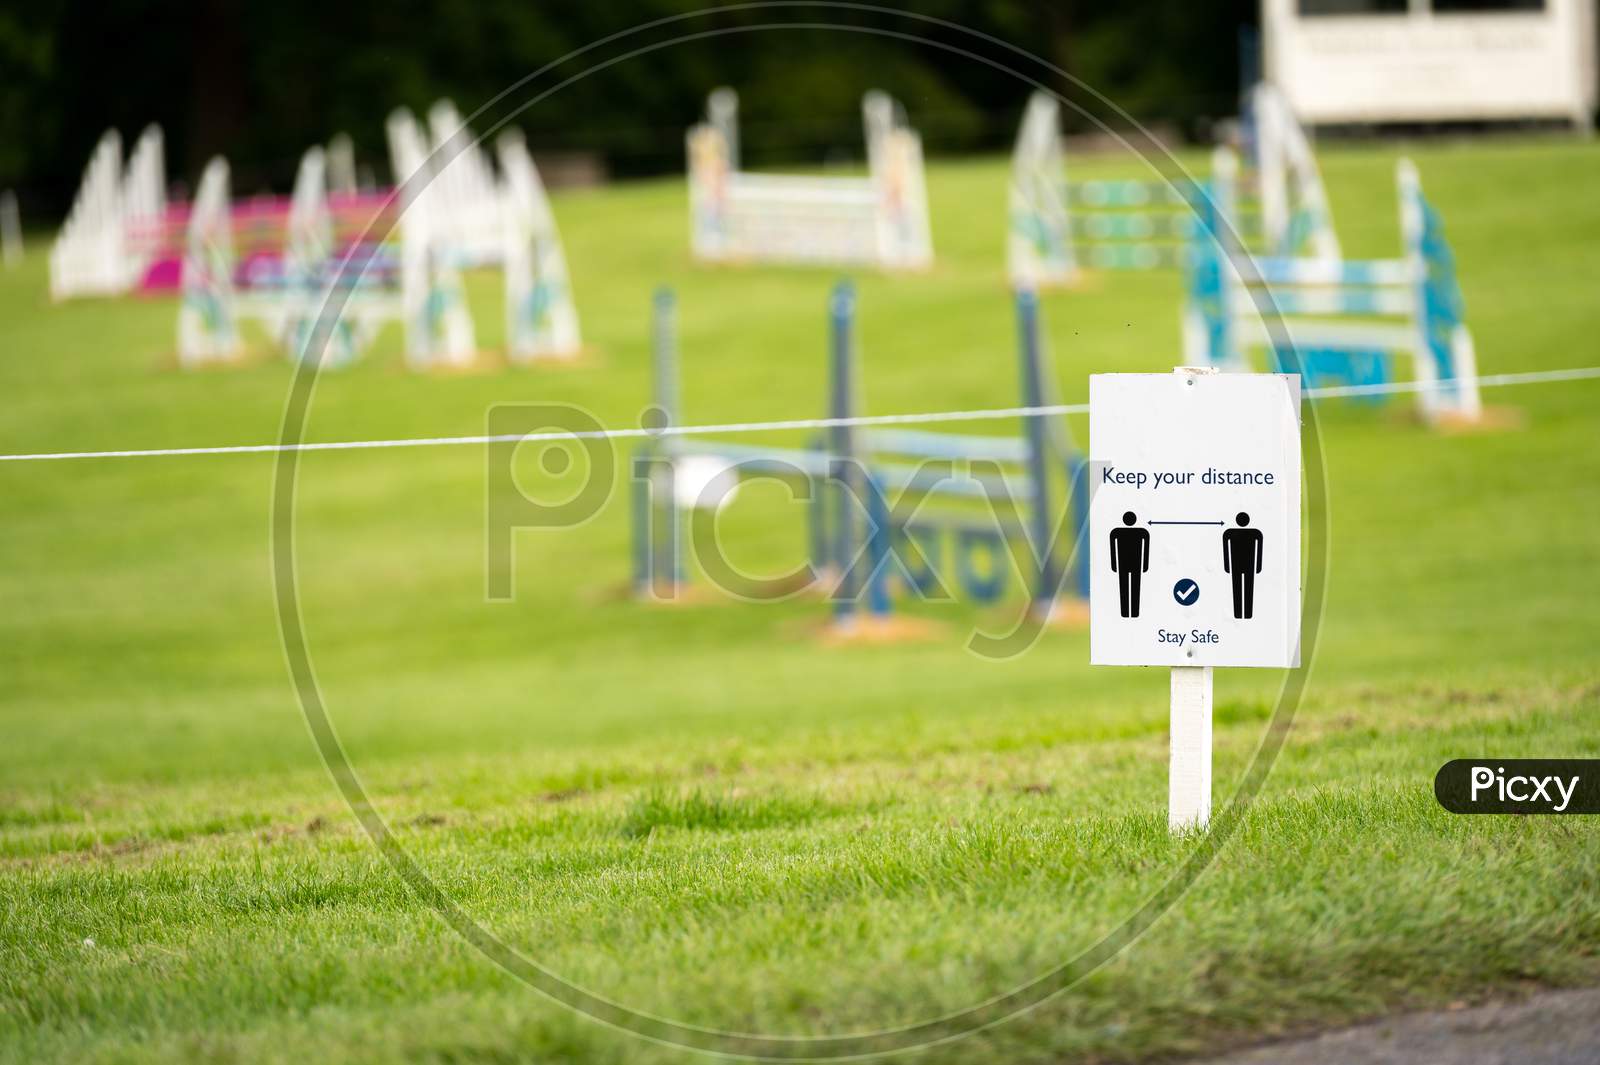 A Covid-19 Social Distancing Sign Staked Into Grass With An Equestrian Show Jumping Outdoor Event In The Background